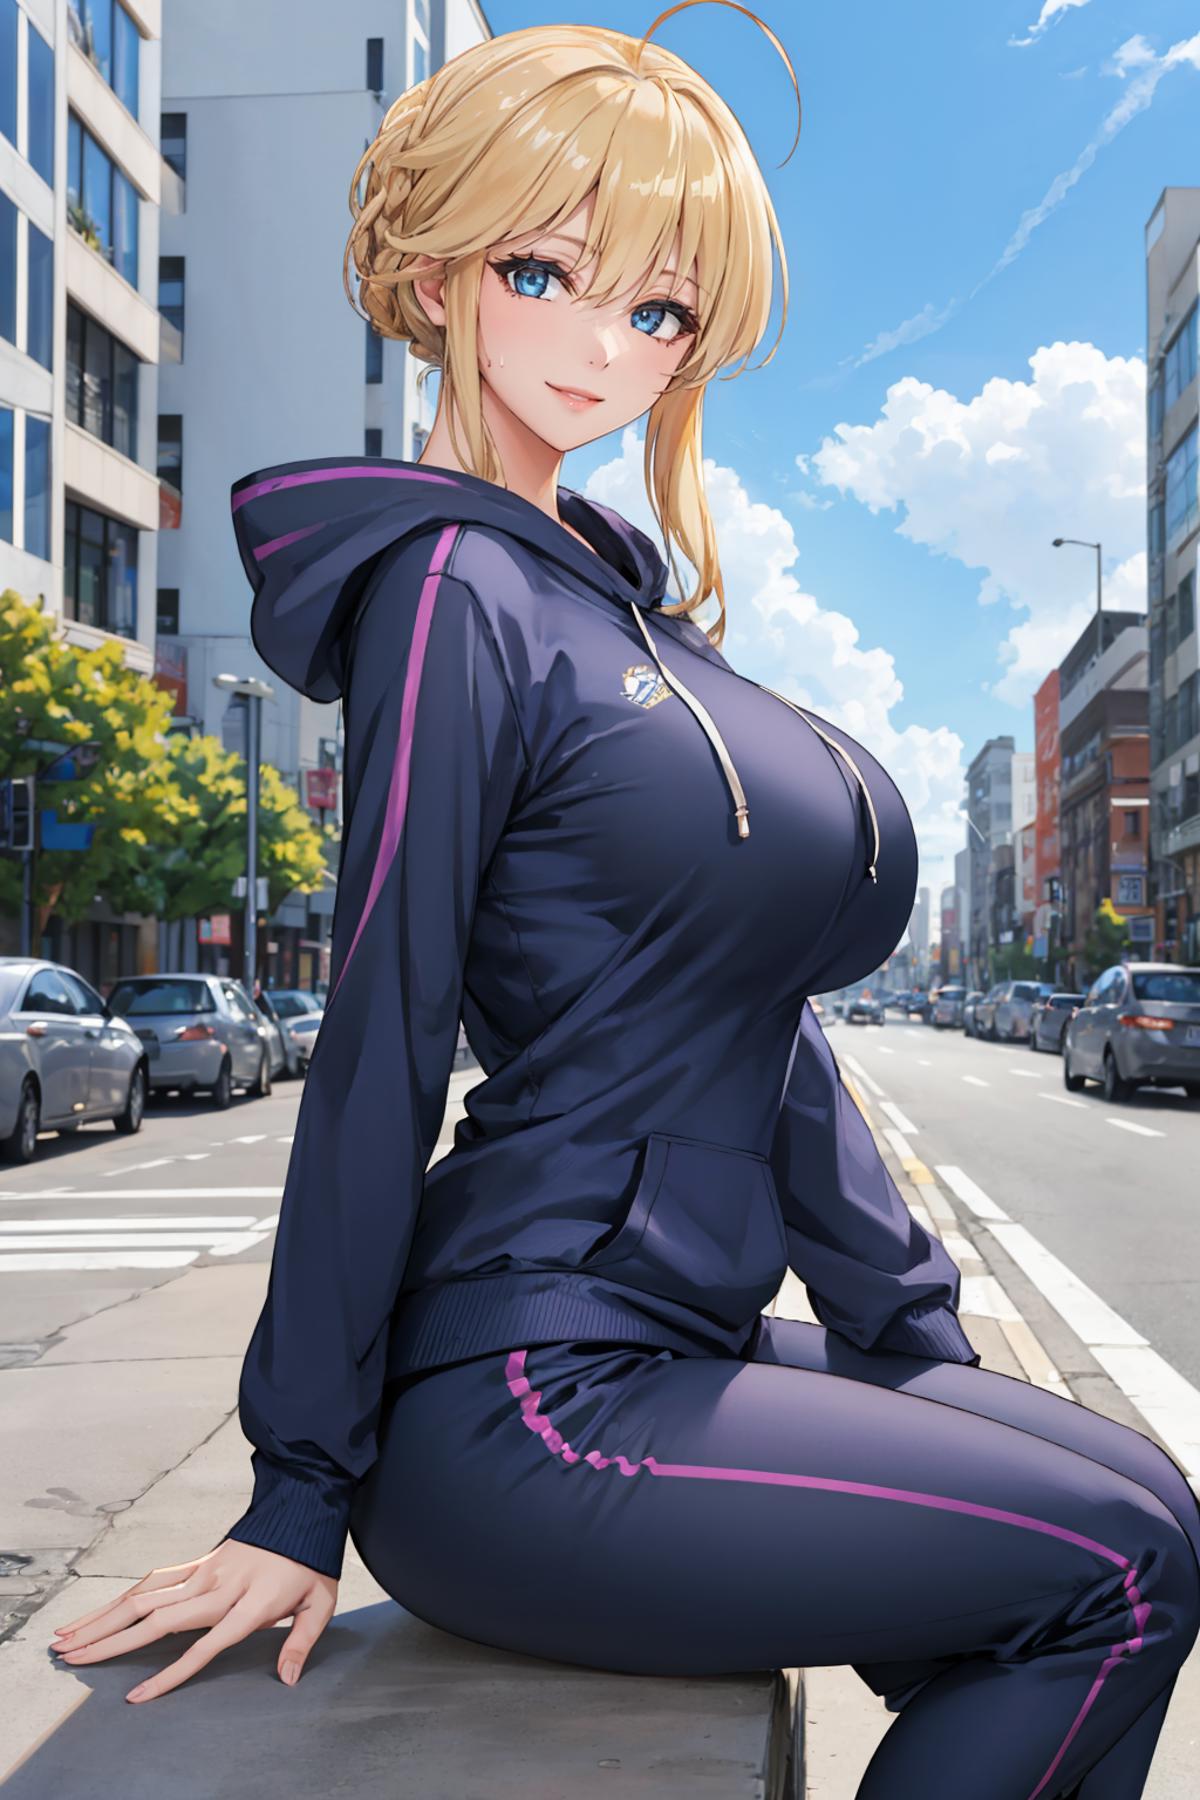 Anime-style cartoon character with big breasts, wearing a blue hoodie and pants, standing on street with cars in background.